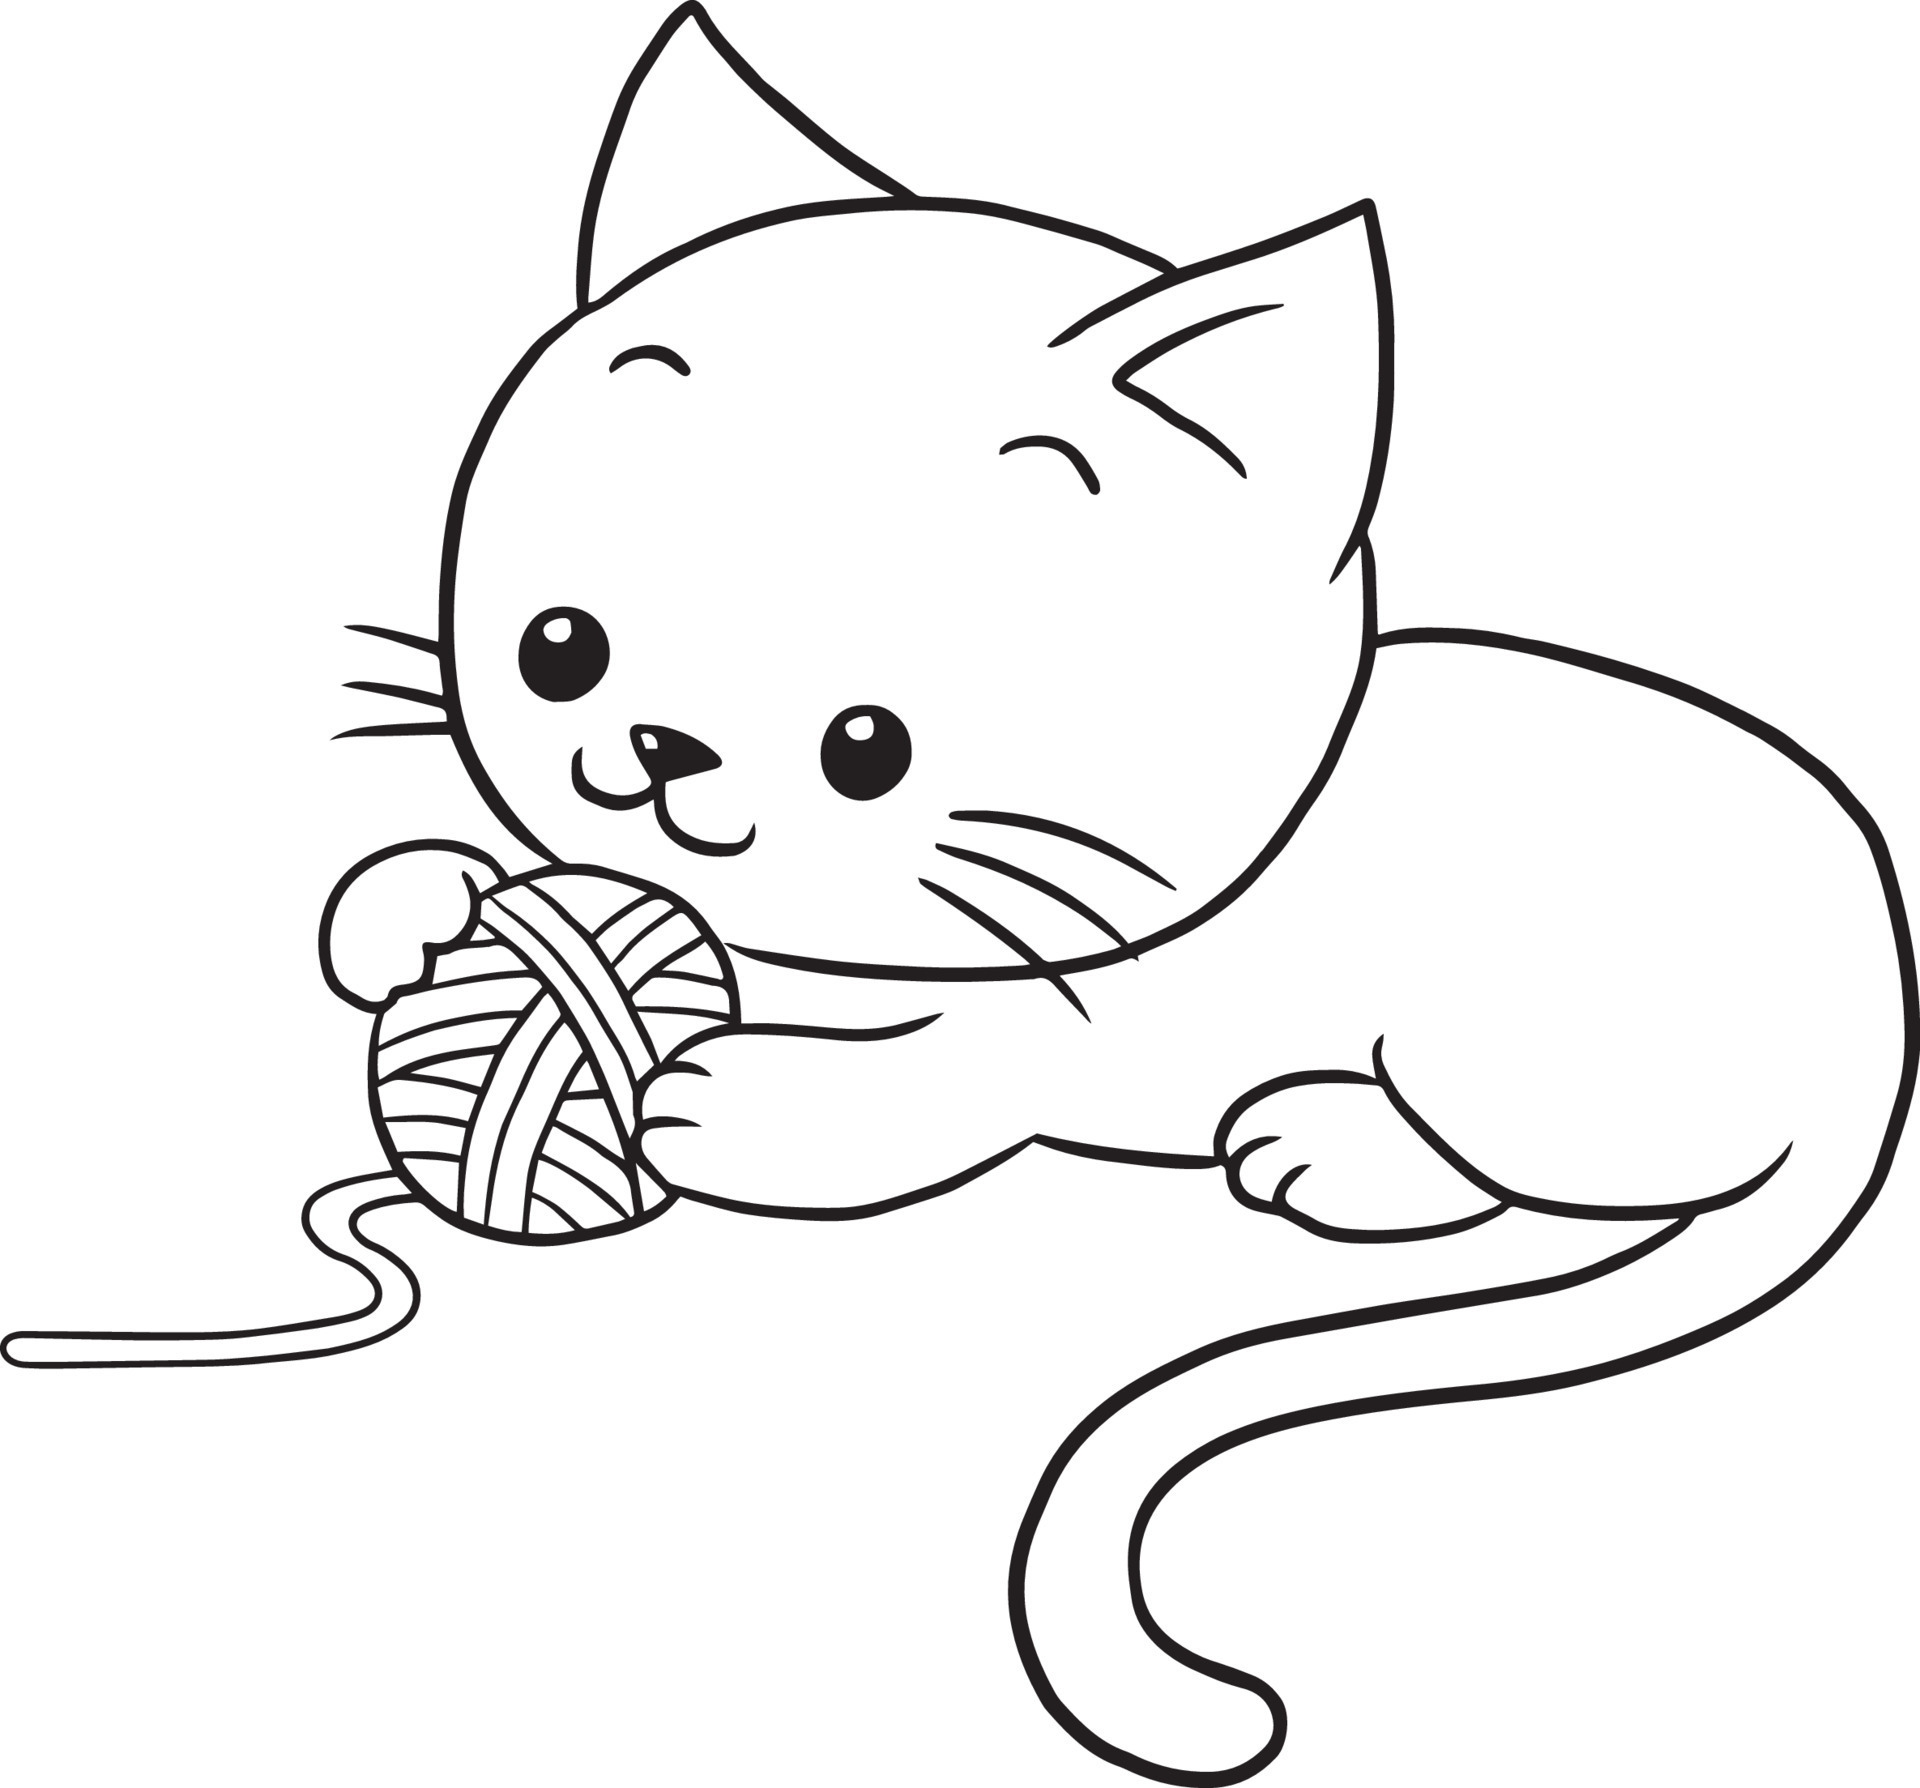 Cat Coloring Pages - ColoringBay